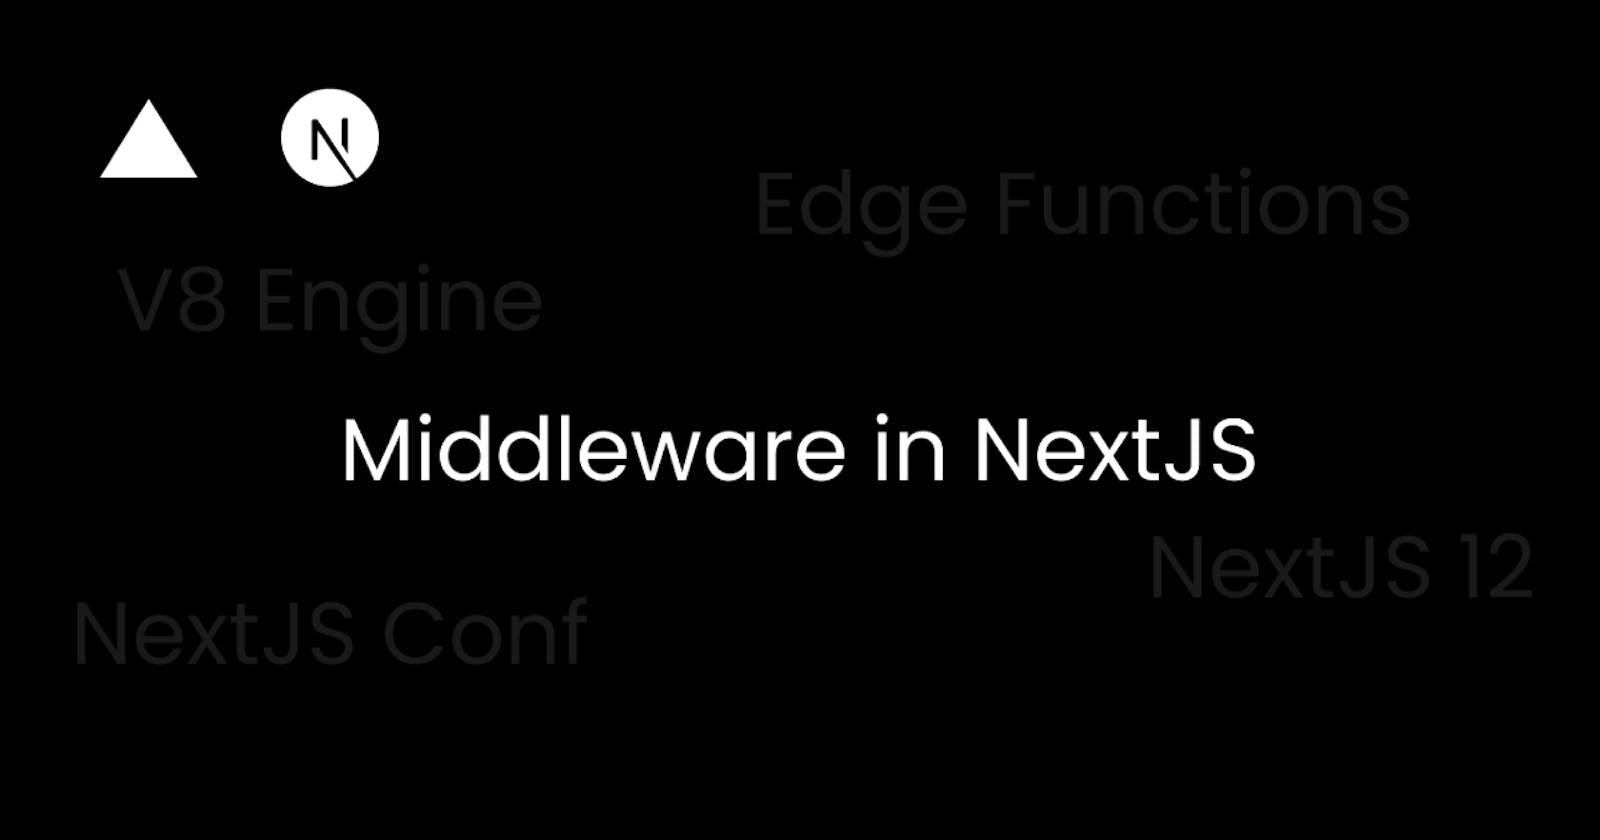 Introduction to Next.js 12 Middleware and Edge Functions